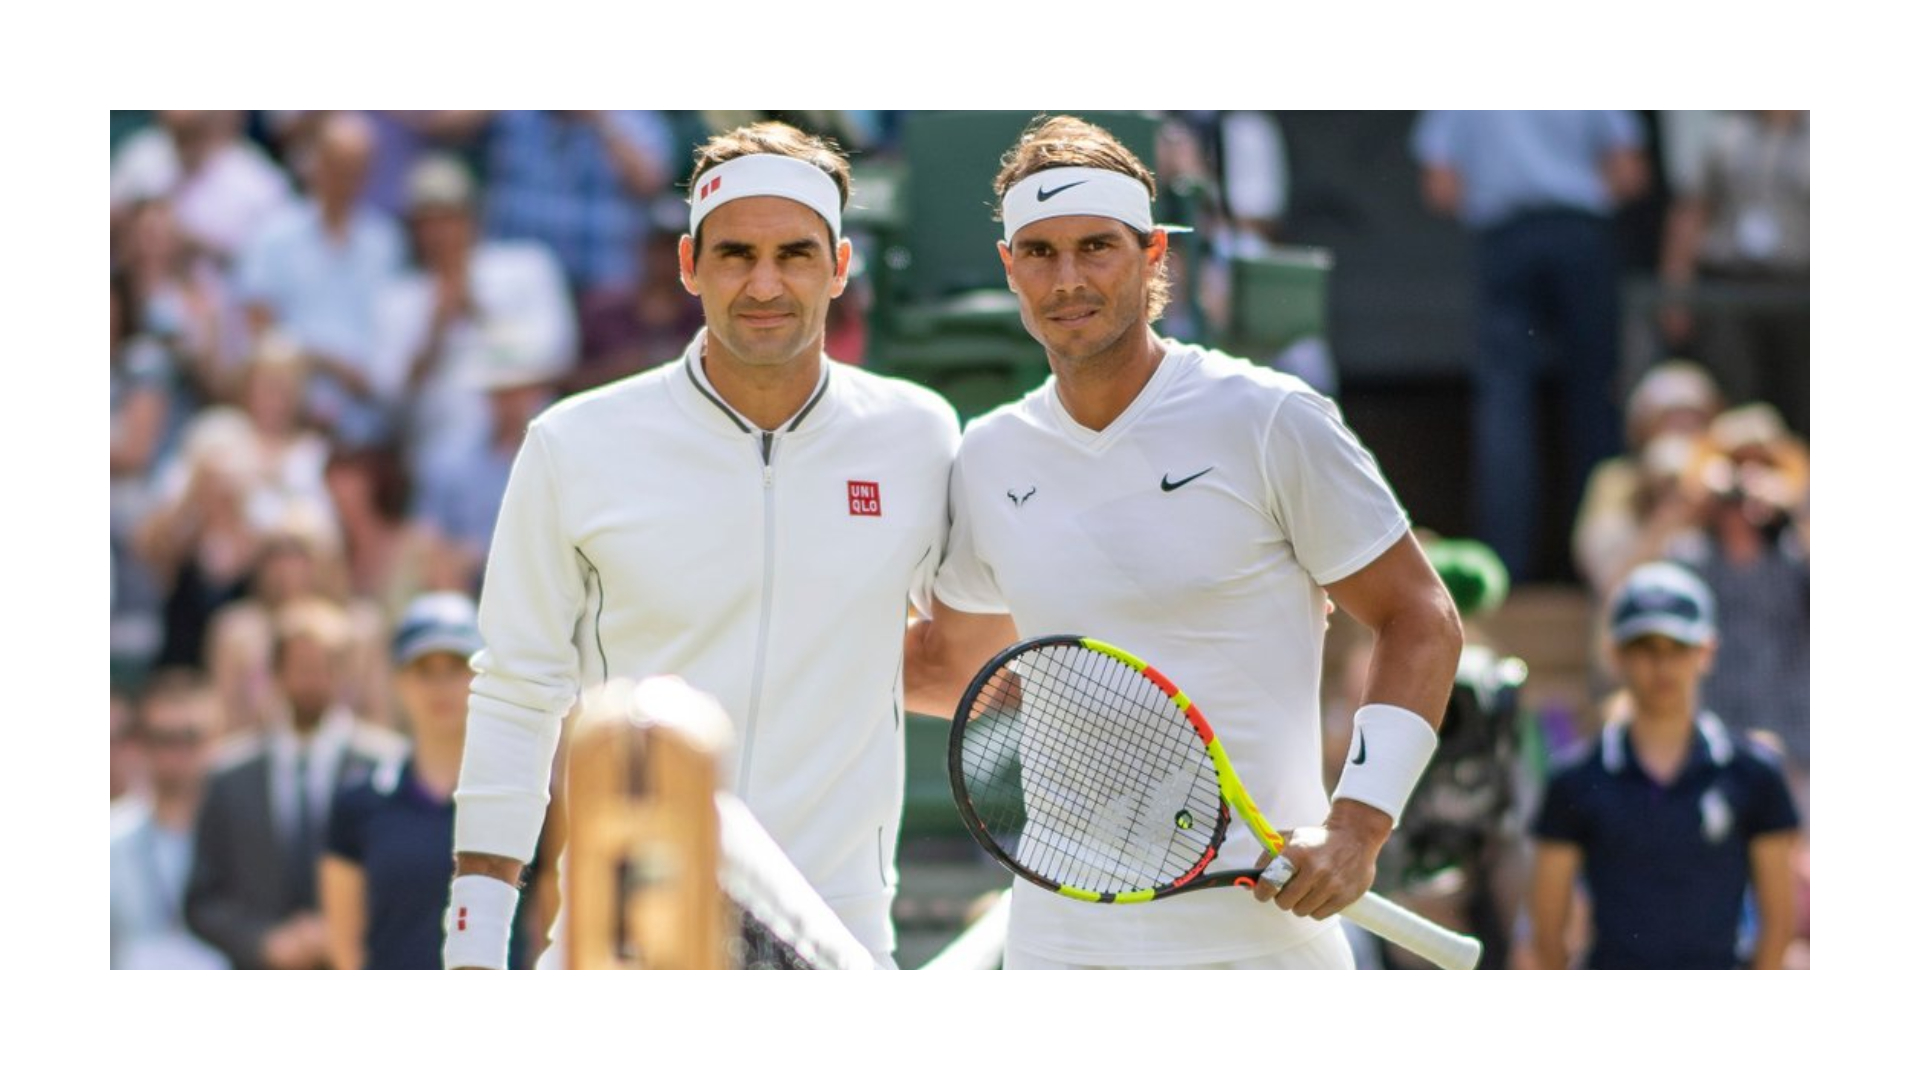 Roger Federer and Rafael Nadal in file photo; Credit: Wimbledon